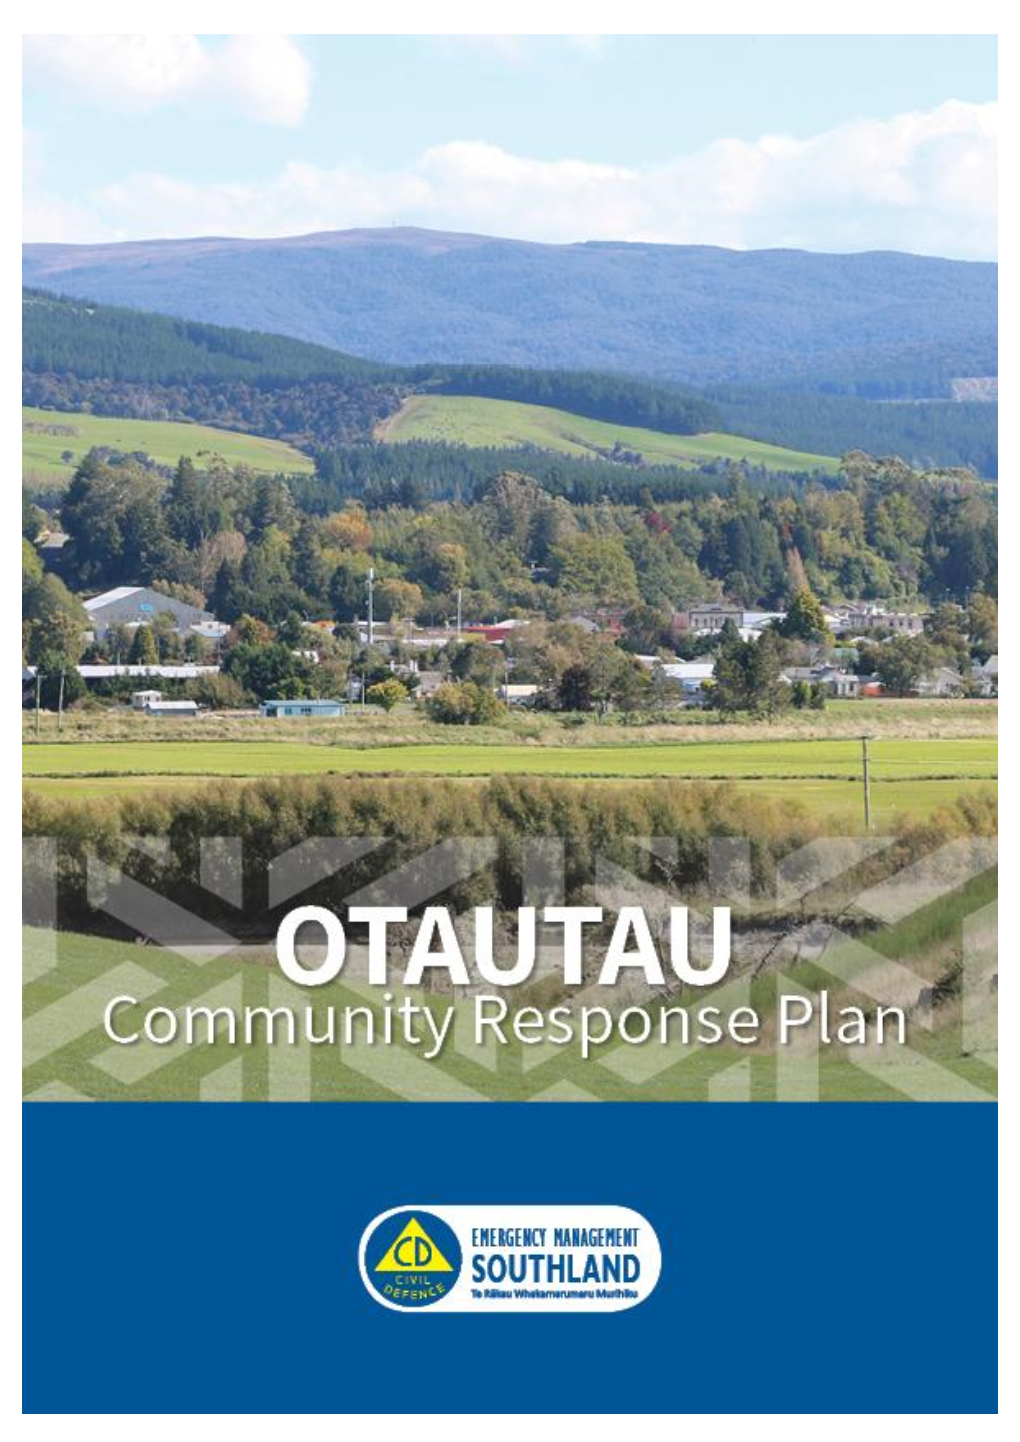 Otautau Community Response Plan 2019 Find More Information on How You Can Be Prepared for an Emergency